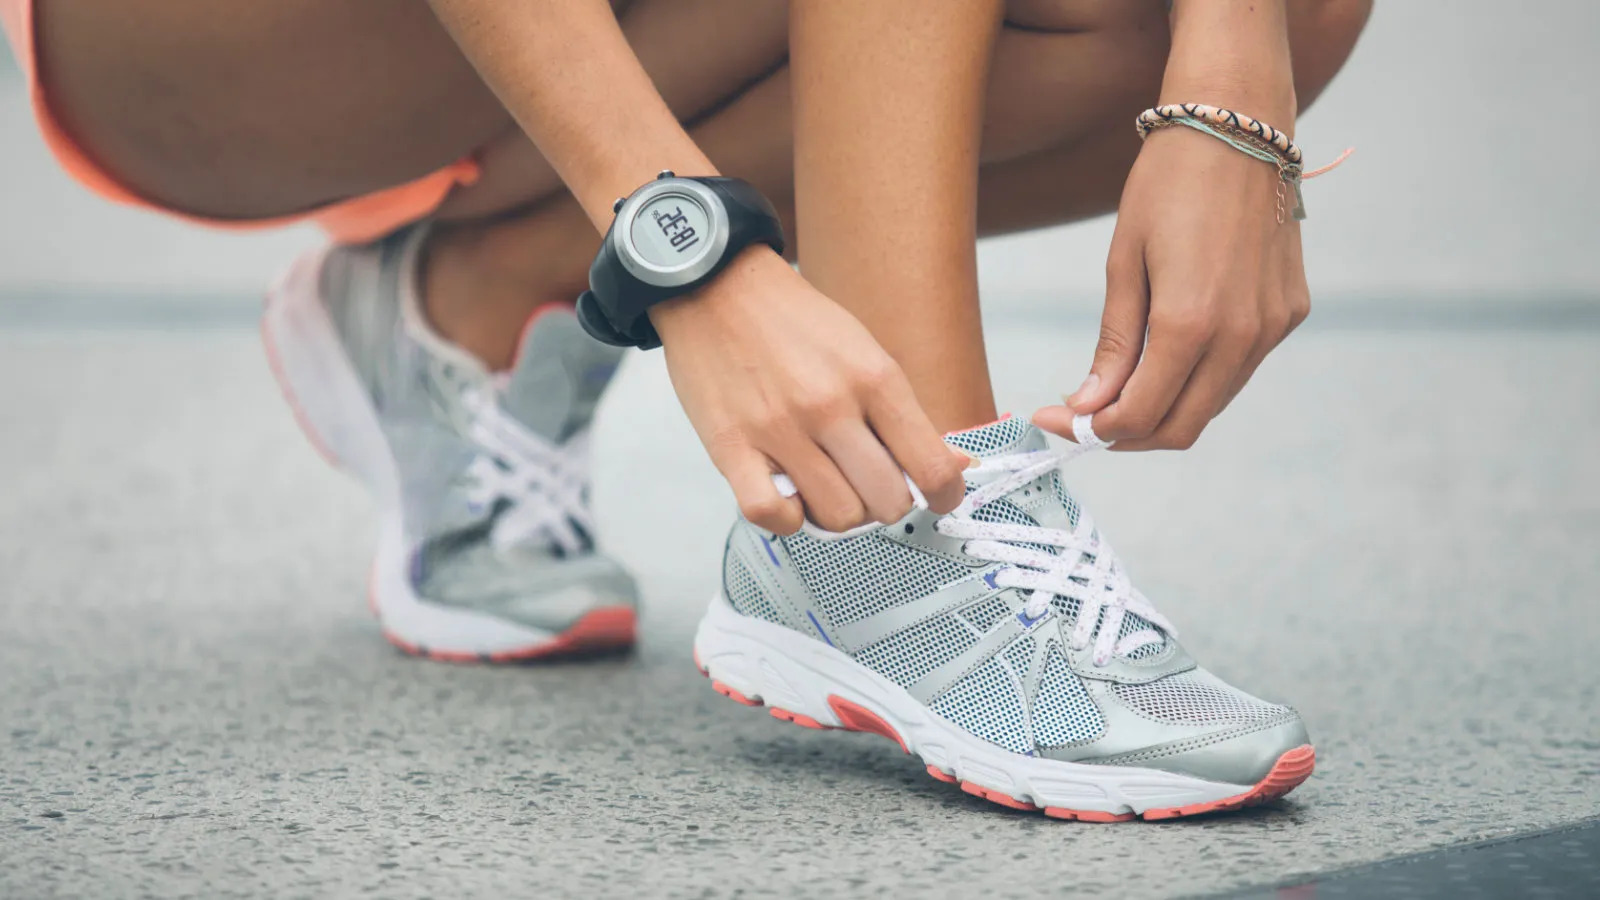 How To Measure Your Feet For Running Shoes